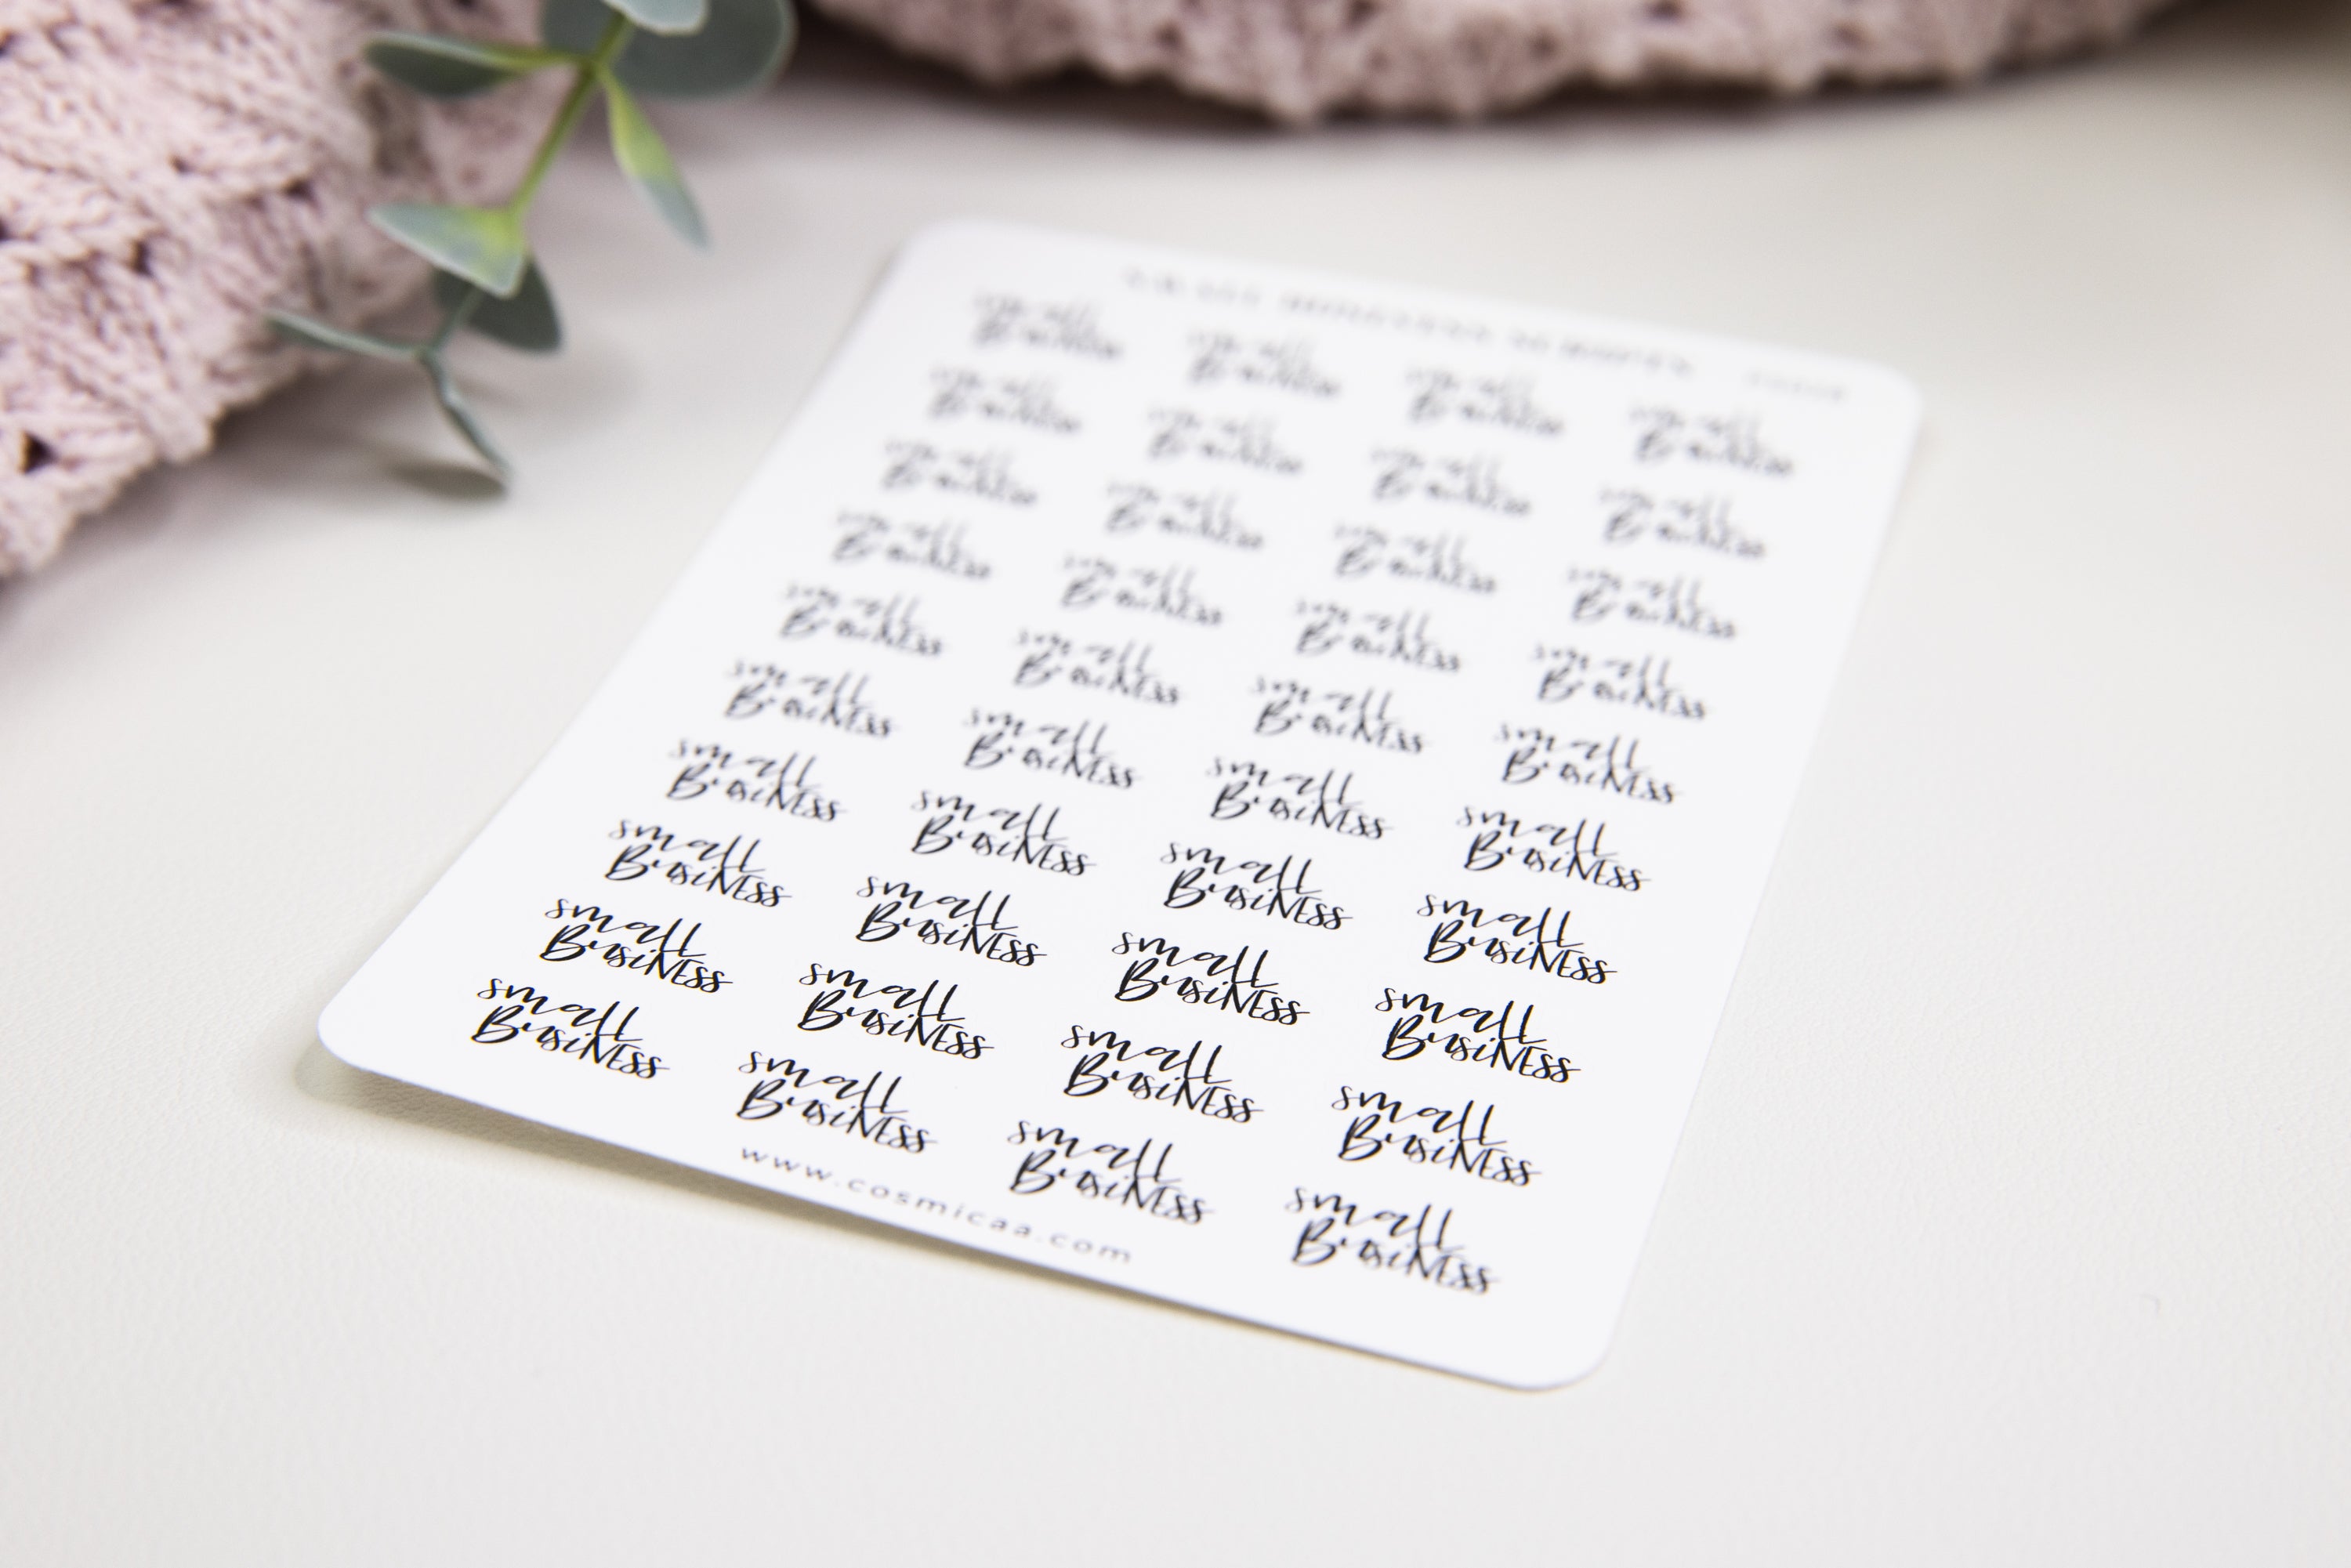 Small Business Scripts  - Planner Stickers